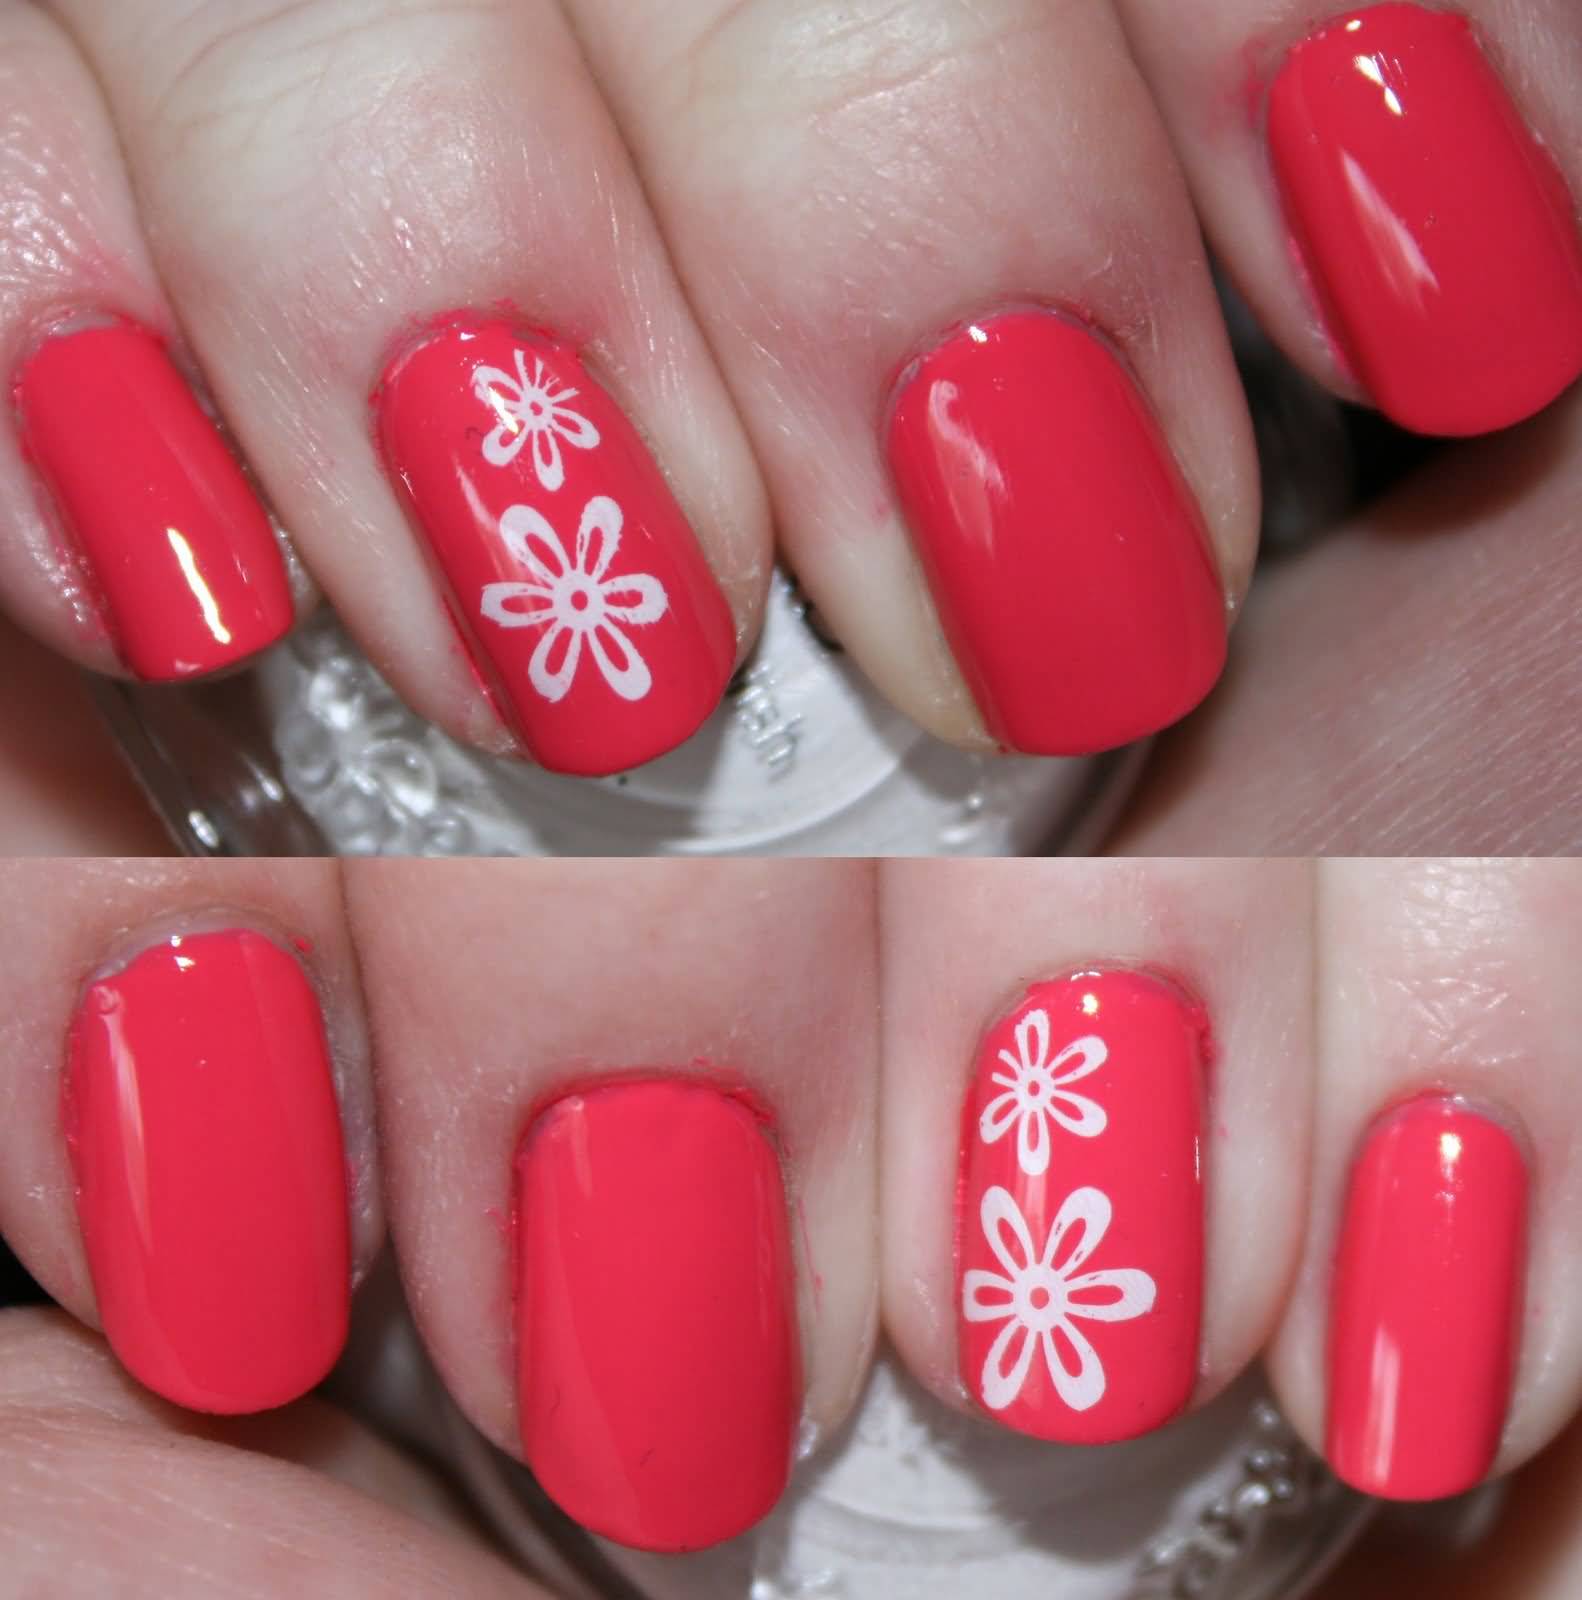 Red Nails With White Flower Accent Nail Art